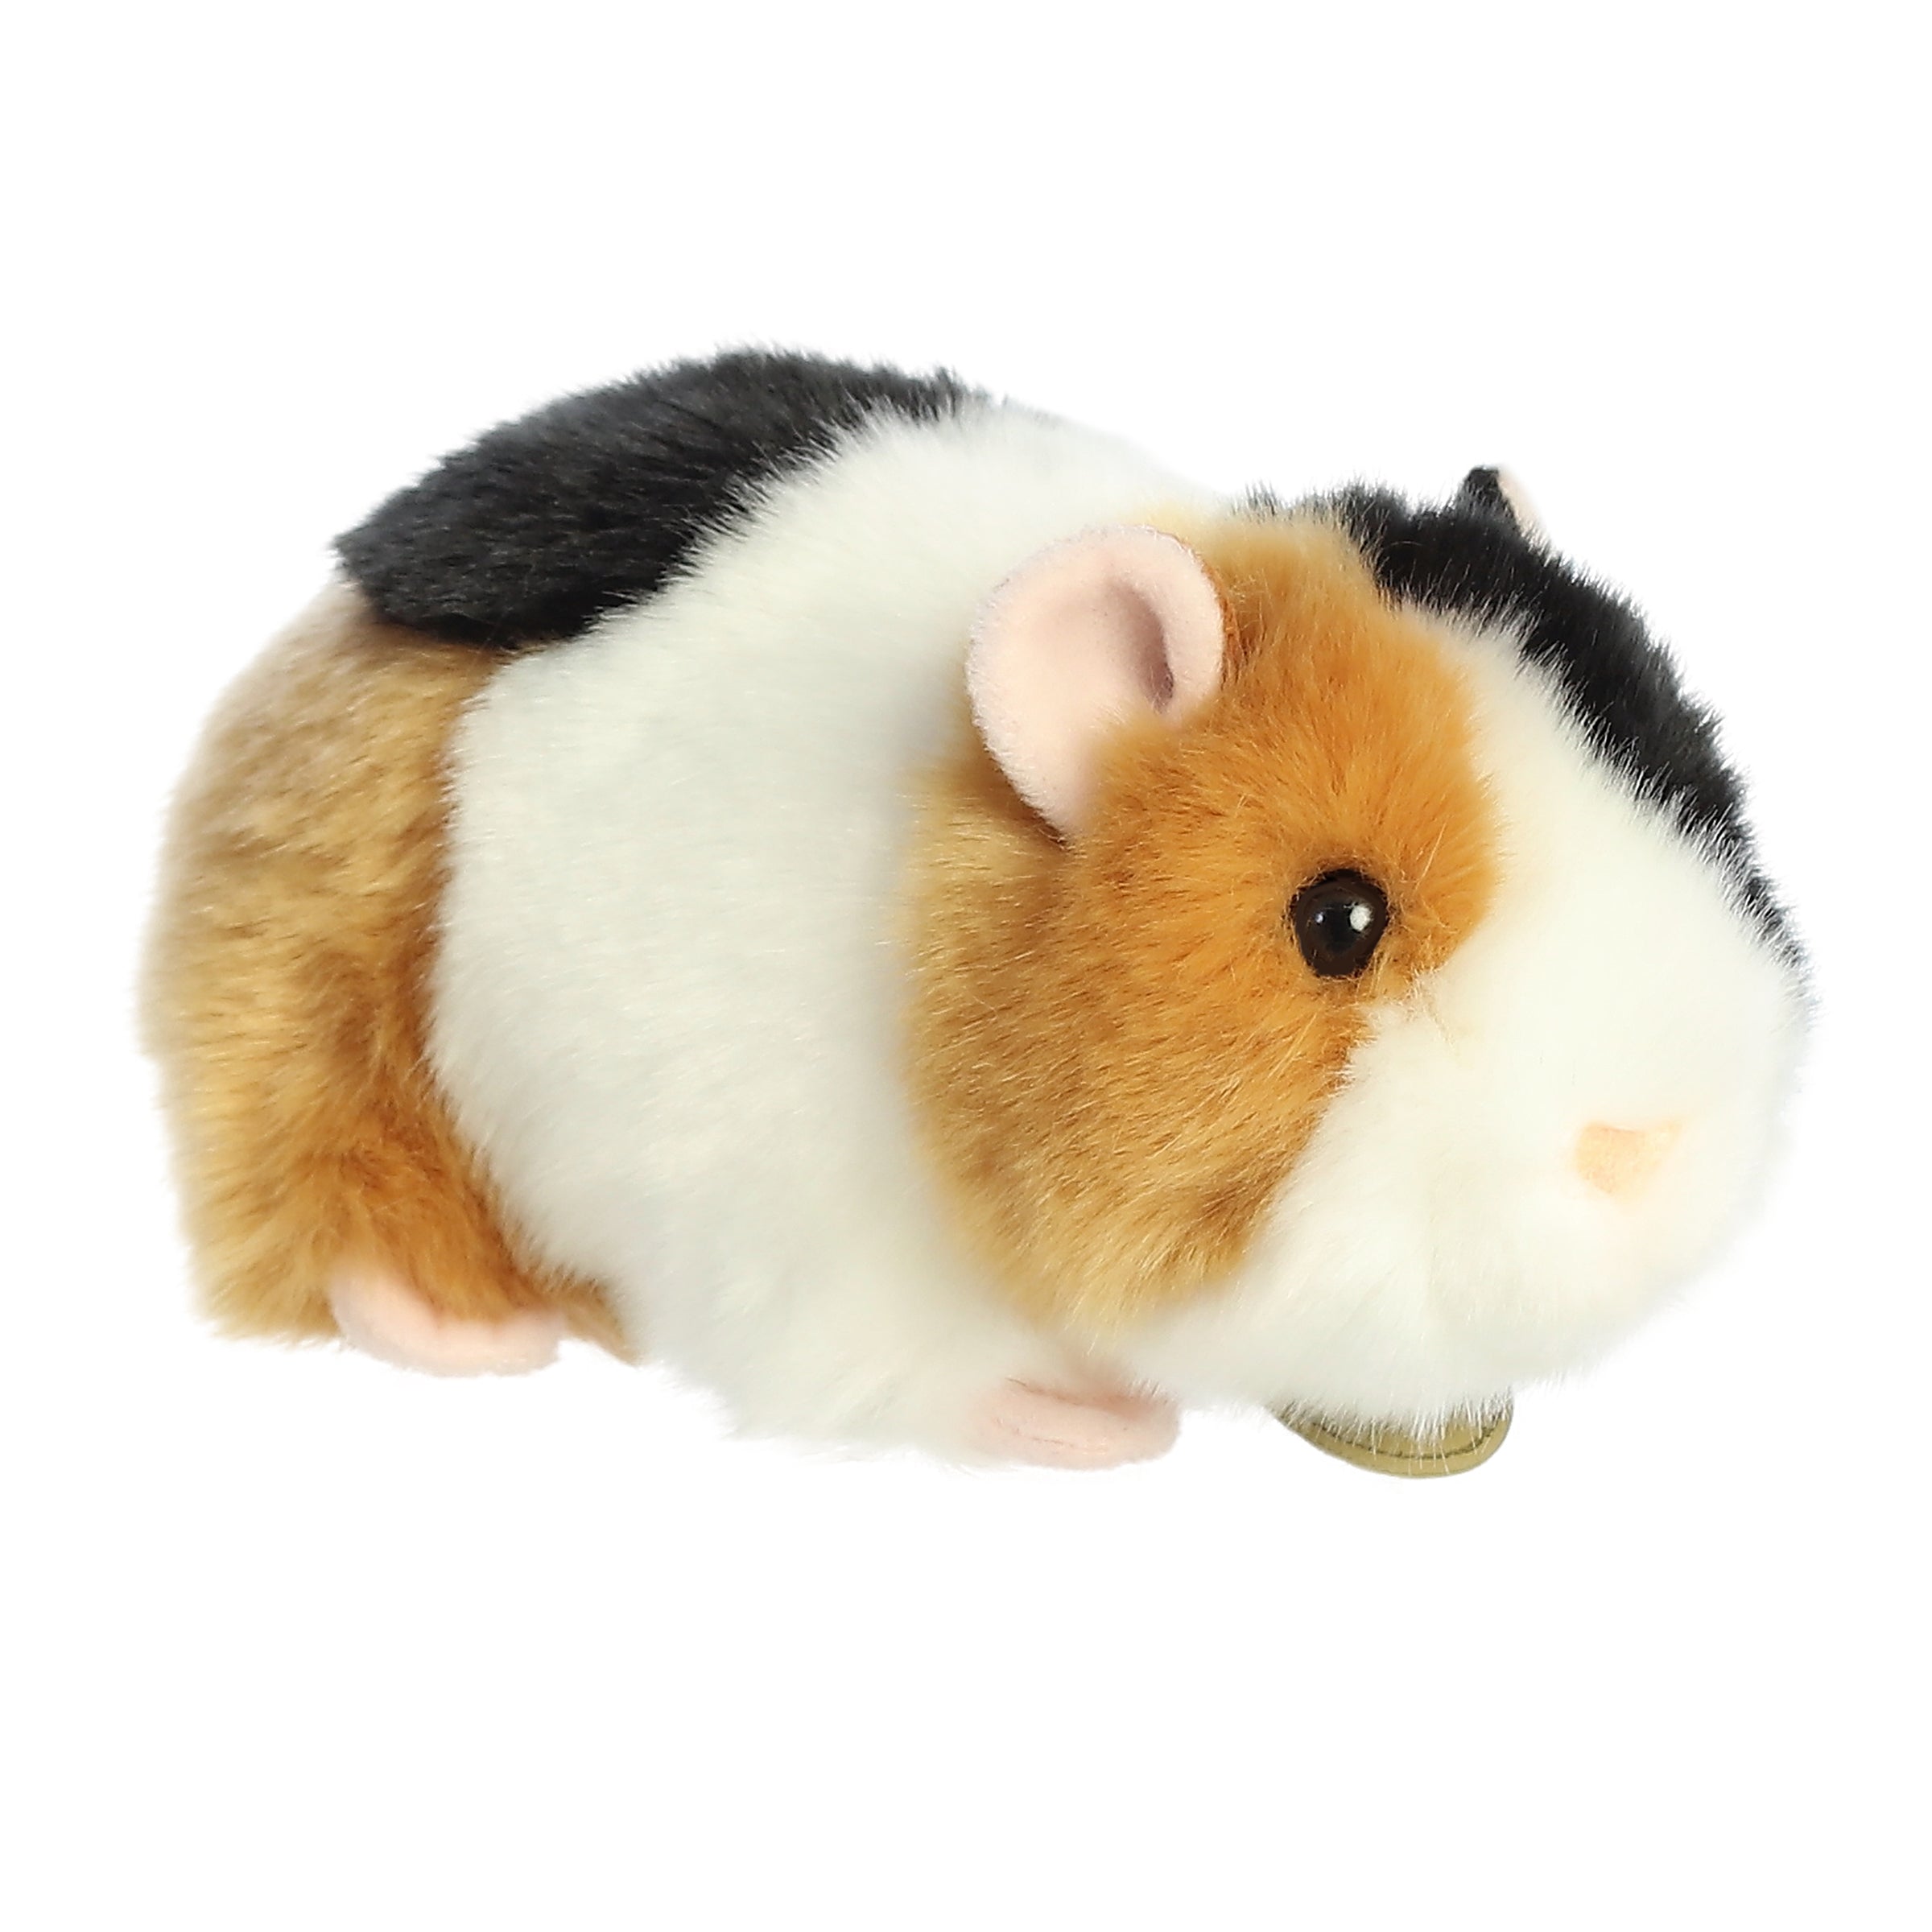 Miyoni American Guinea Pig Plush, realistic tri-color orange, white, and black coat with expressive eyes